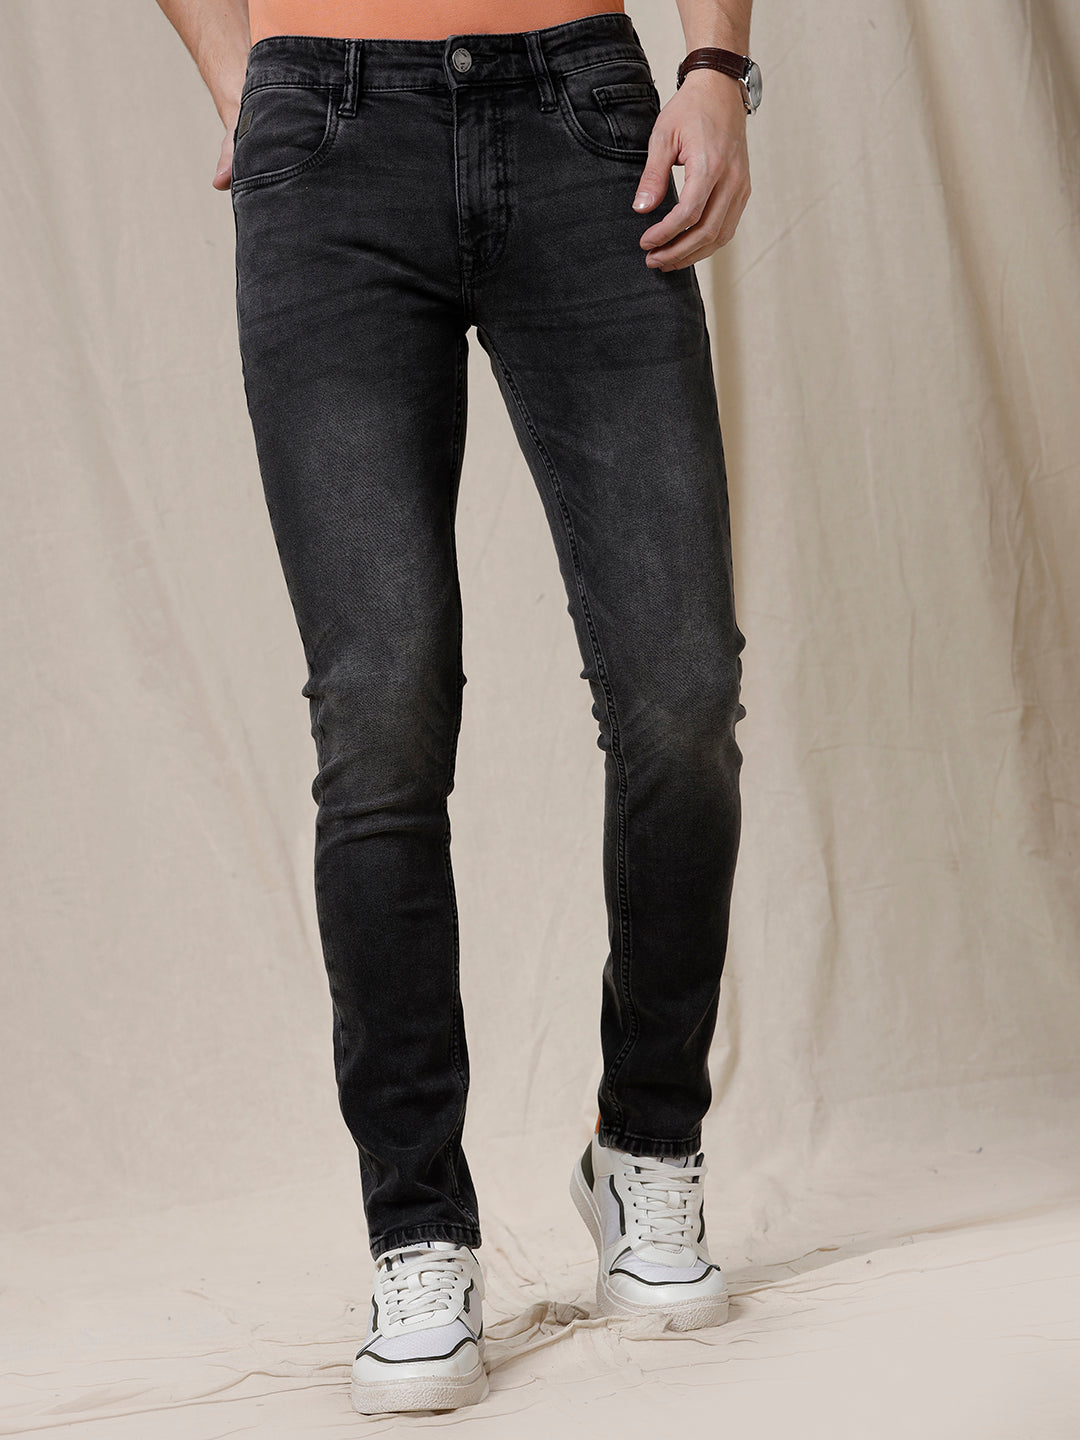 Black Fade Tapered Jeans